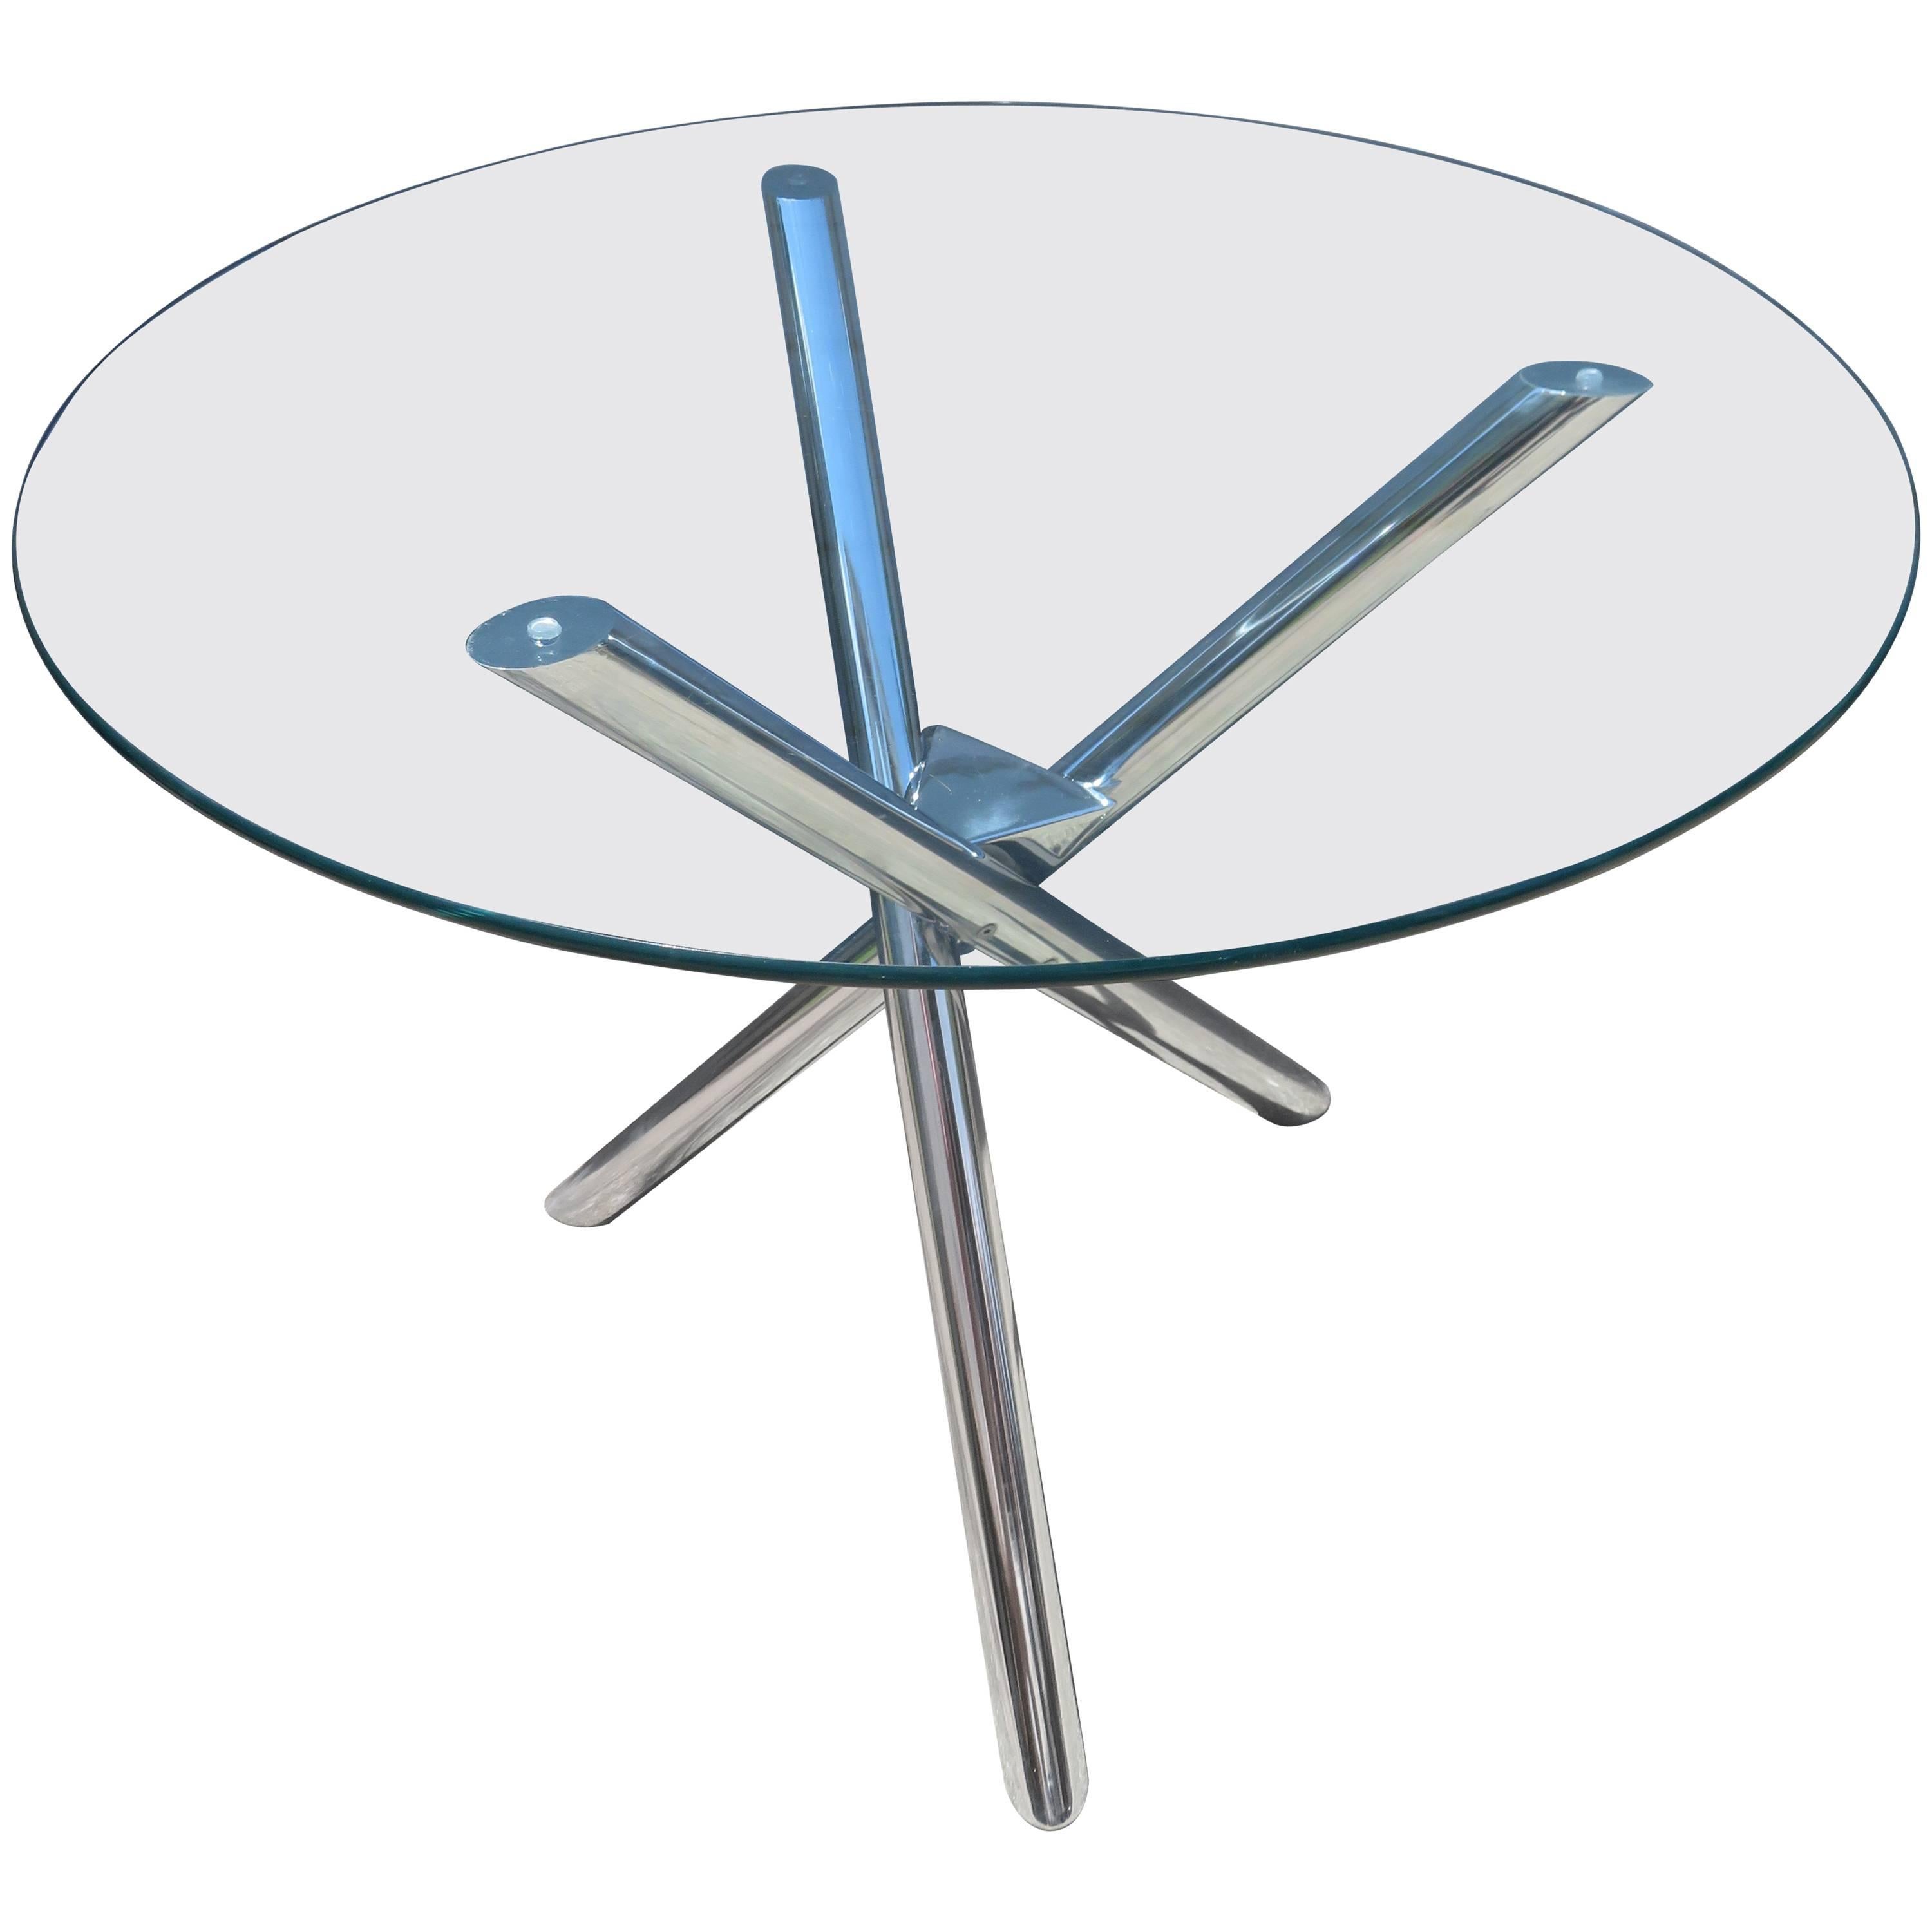 Excellent Pace Style Jax Base Chrome Dining Table Mid-Century Modern